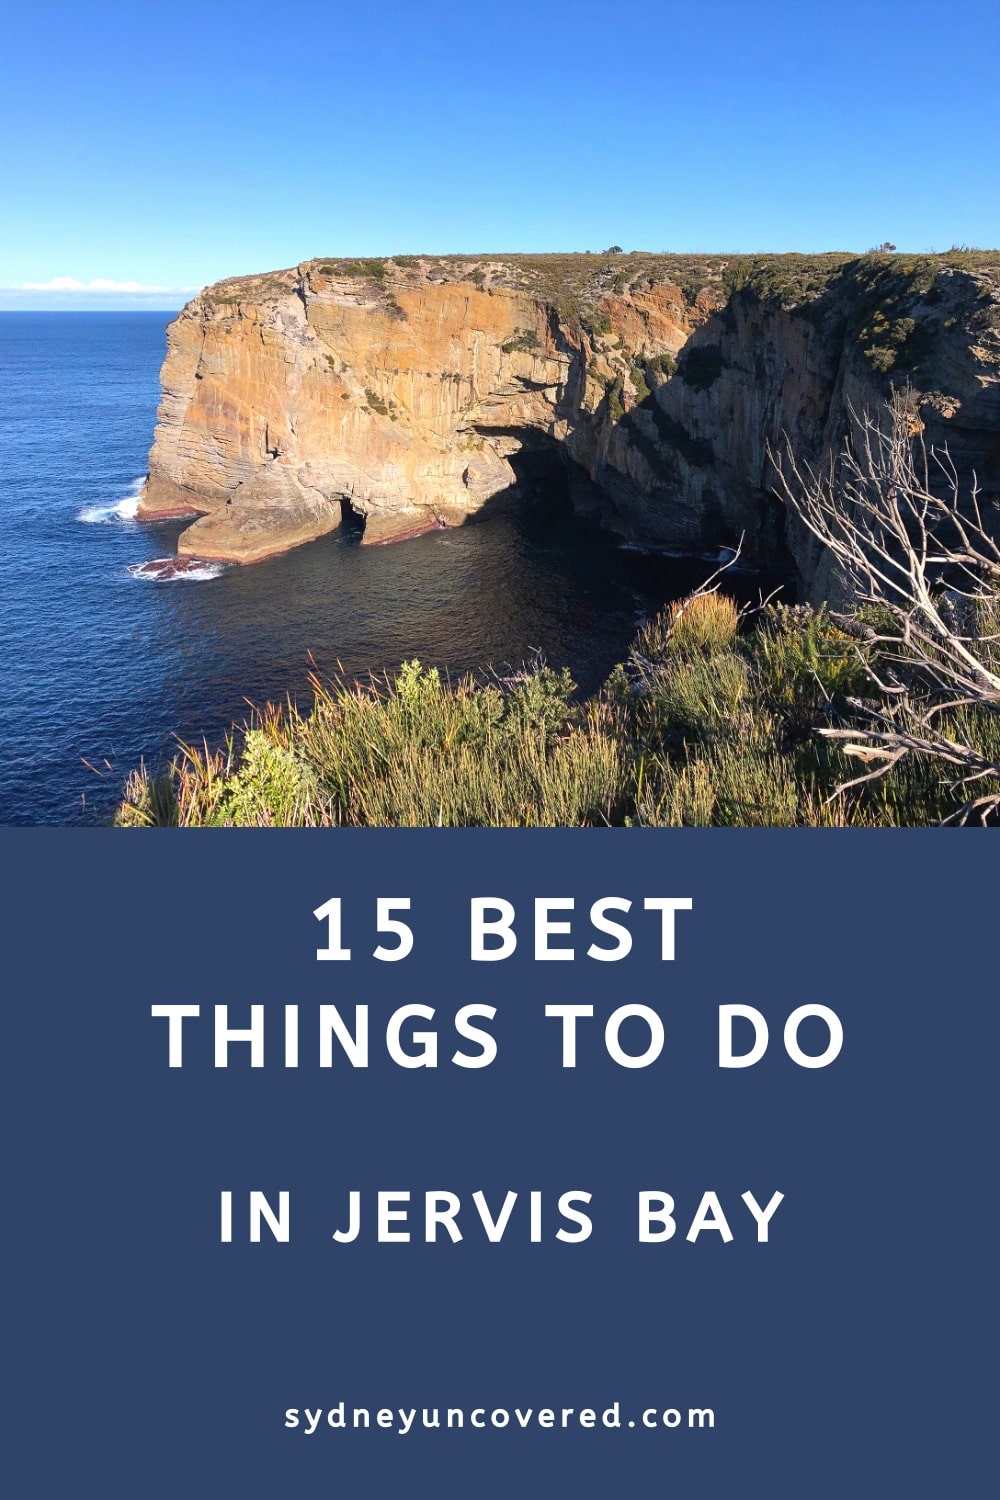 15 Best things to do in Jervis Bay and surrounds